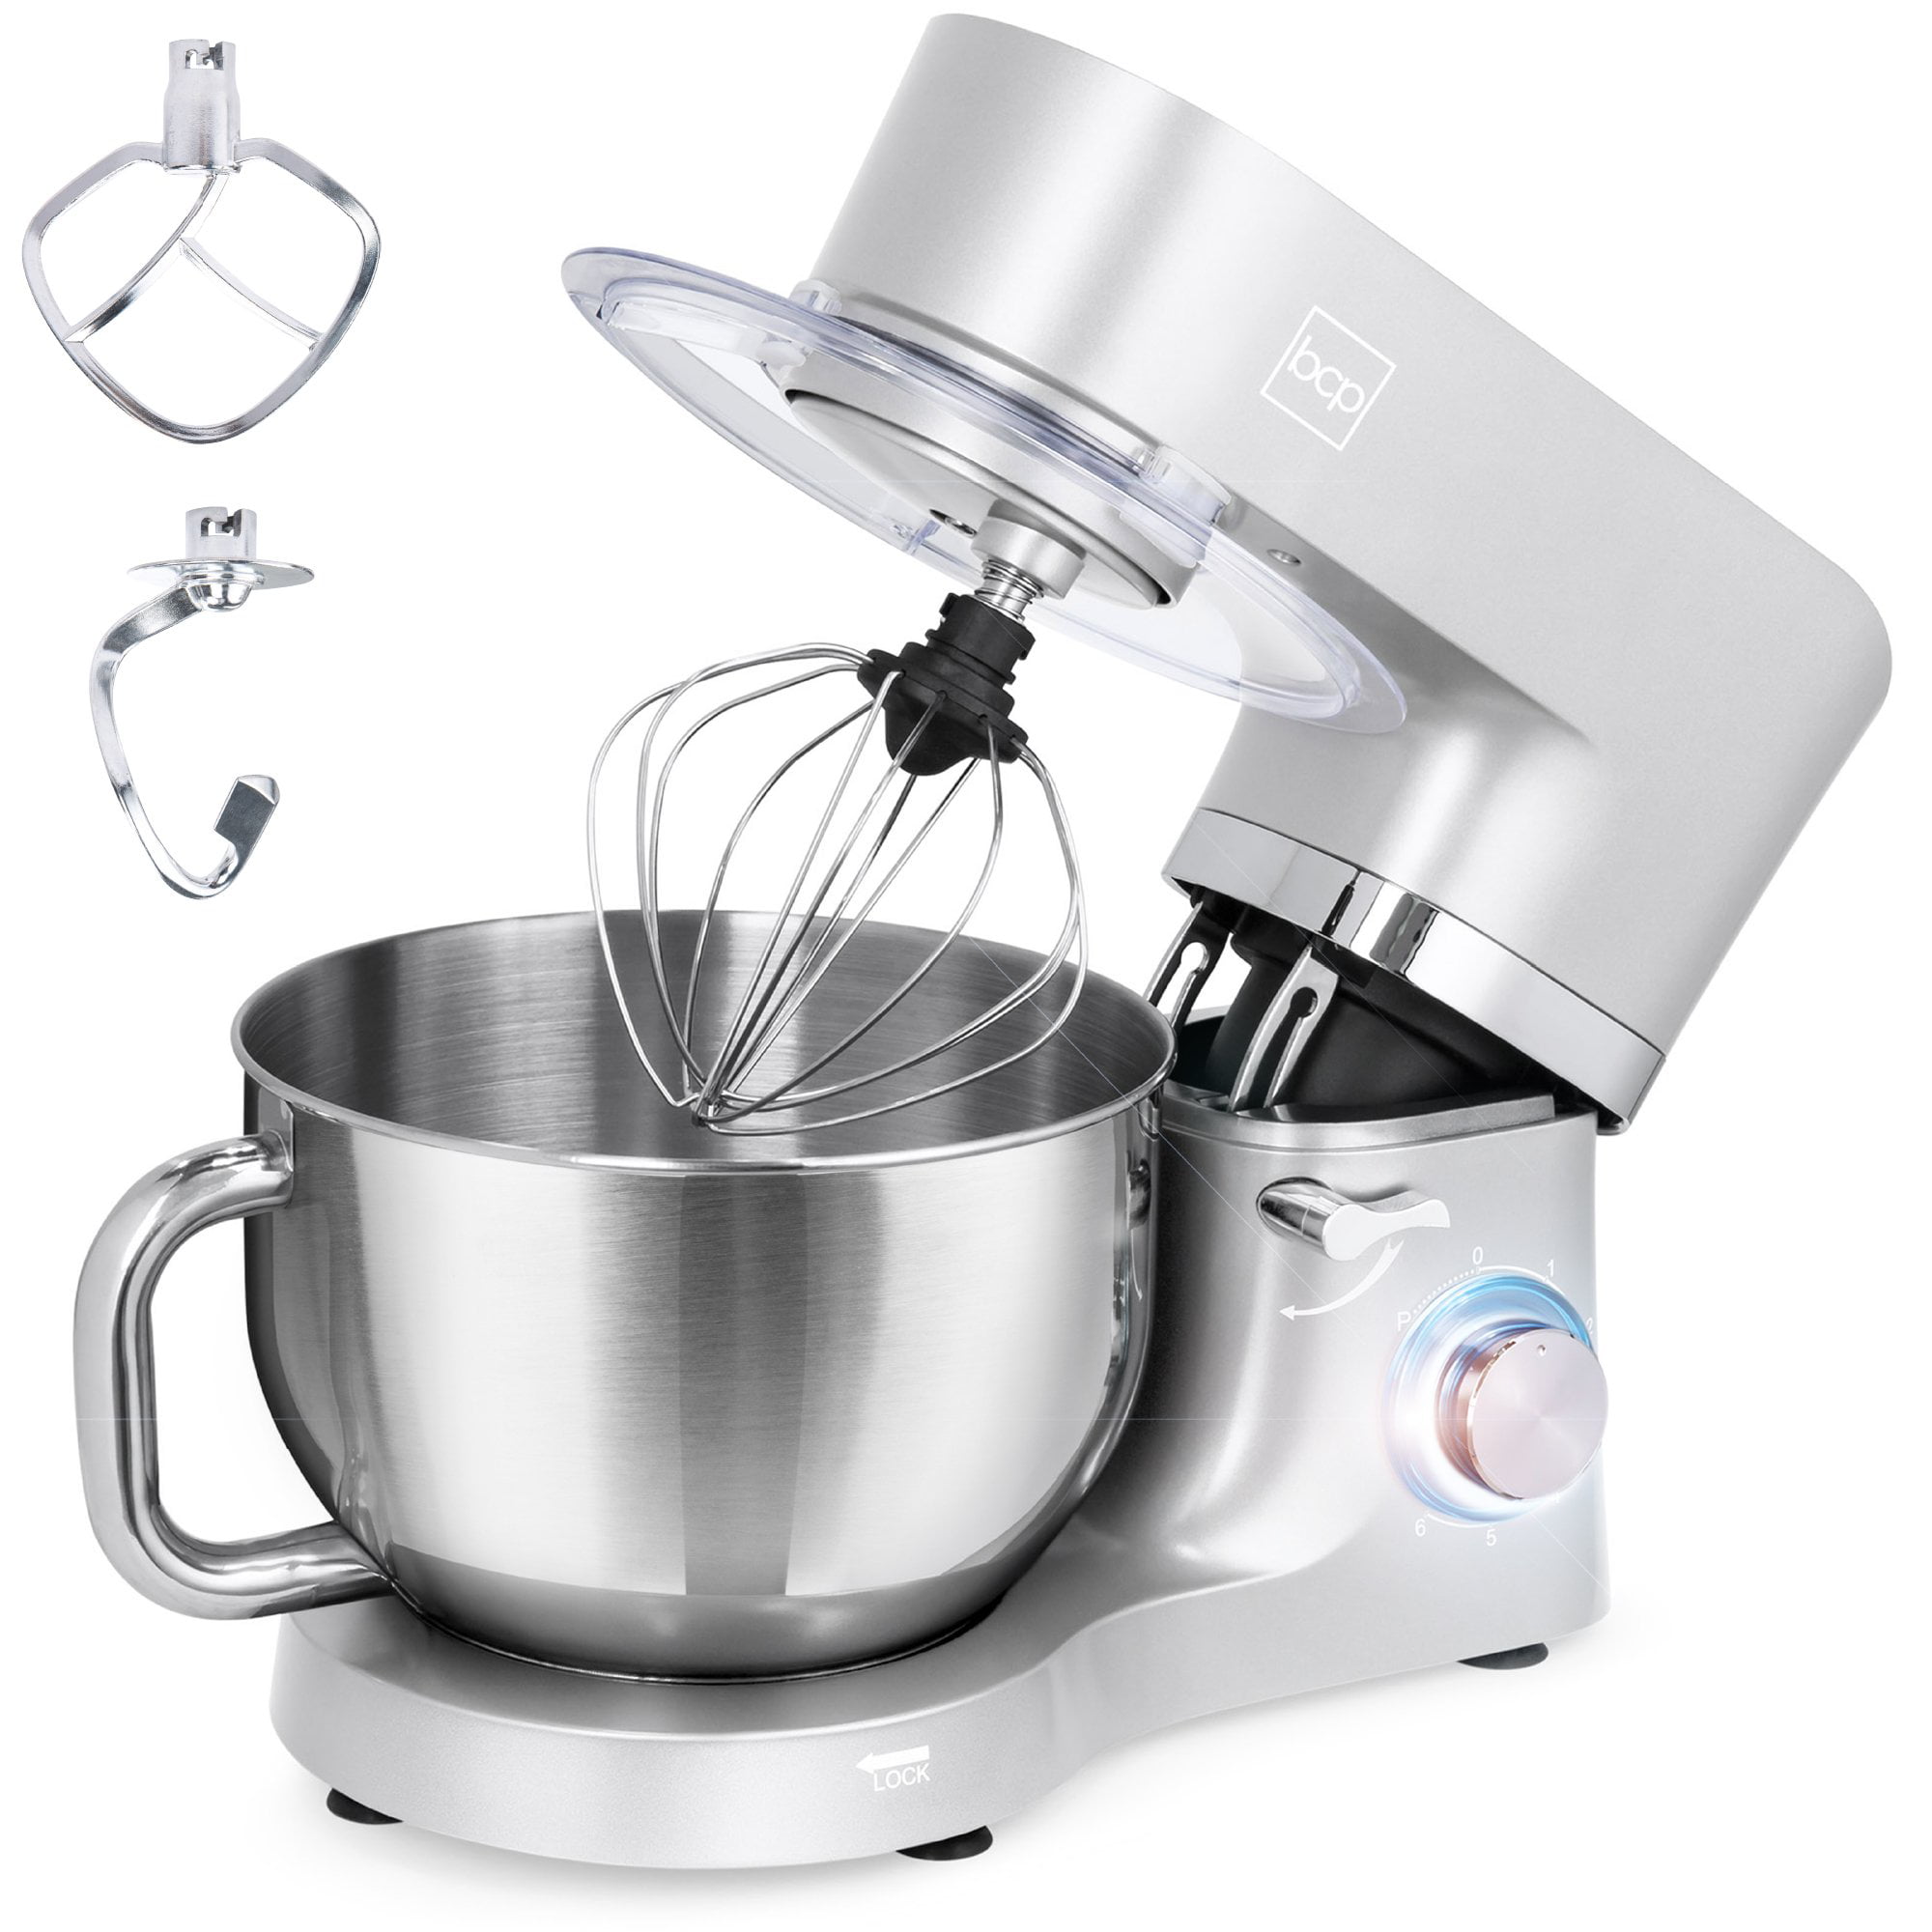 Best Choice Products 6.3qt 660W 6-Speed Multifunctional Tilt-Head Stainless Steel Kitchen Stand Mixer w/ 3 Mixing Attachments Silver Scraper Spatula Splash Guard 